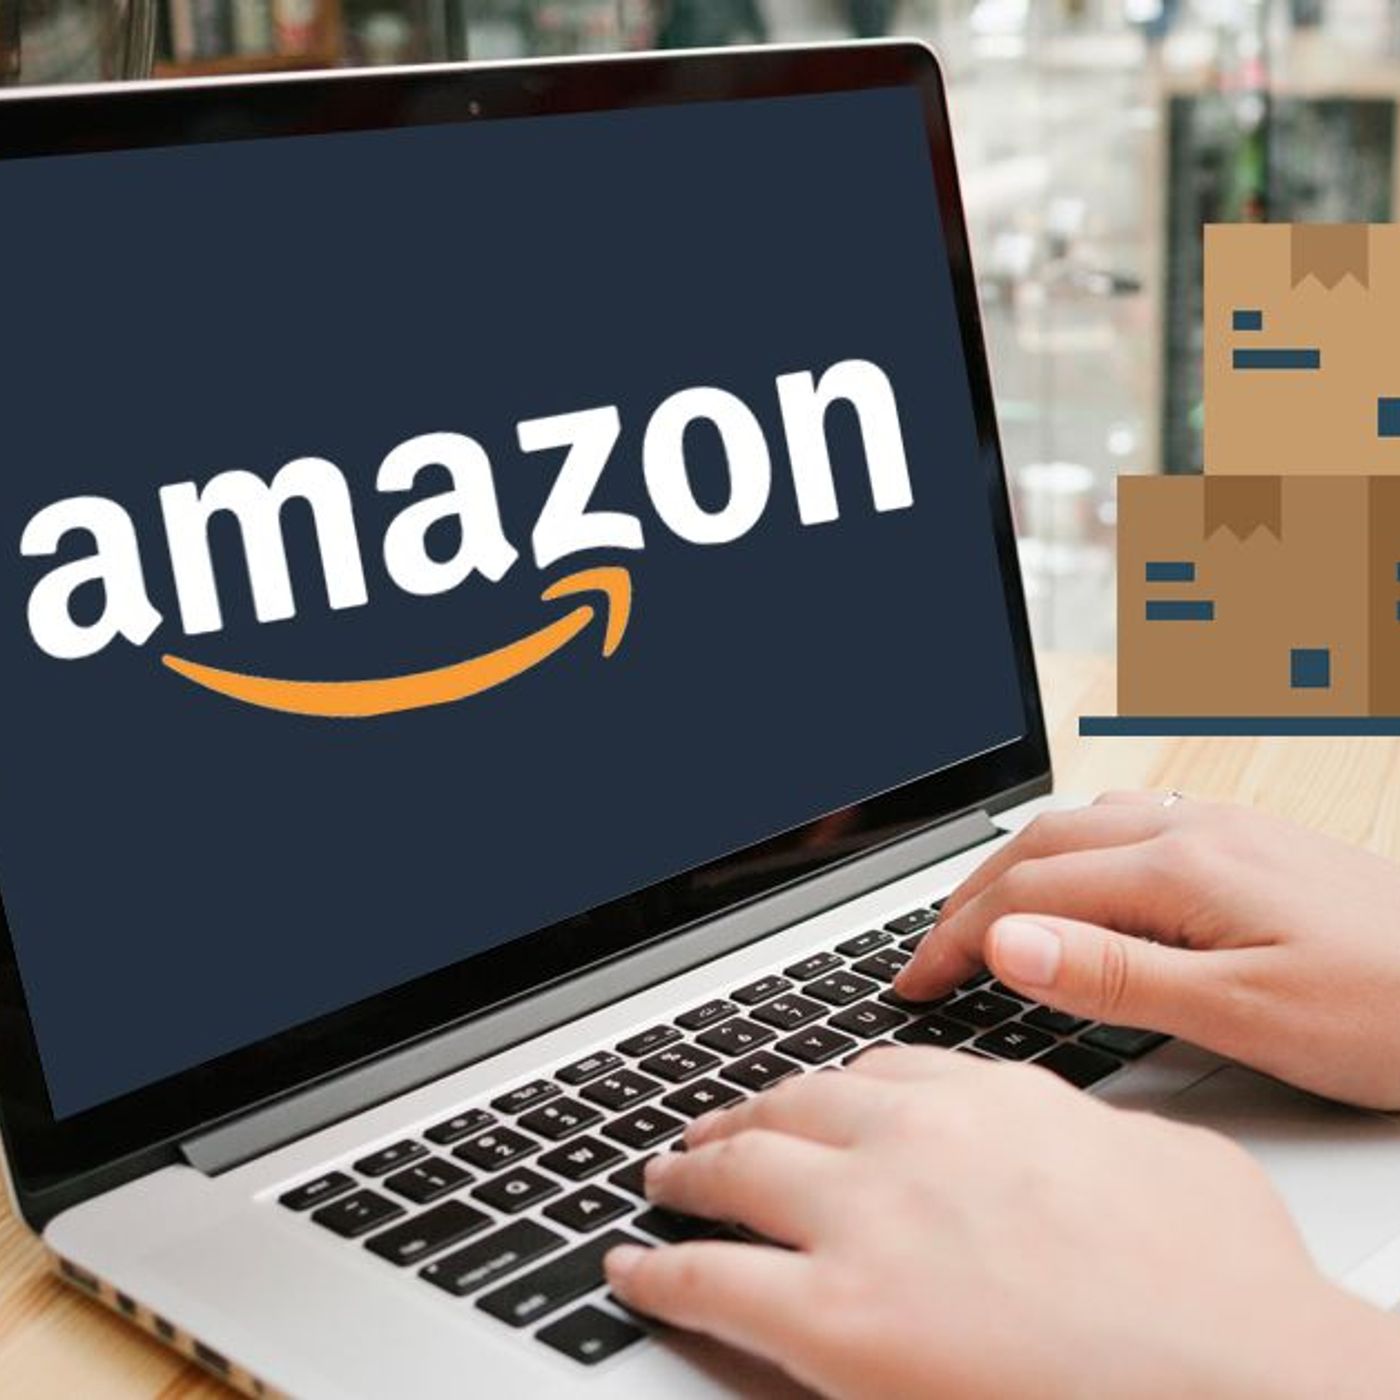 How Data4Amazon’s store management services can elevate your online retailing business